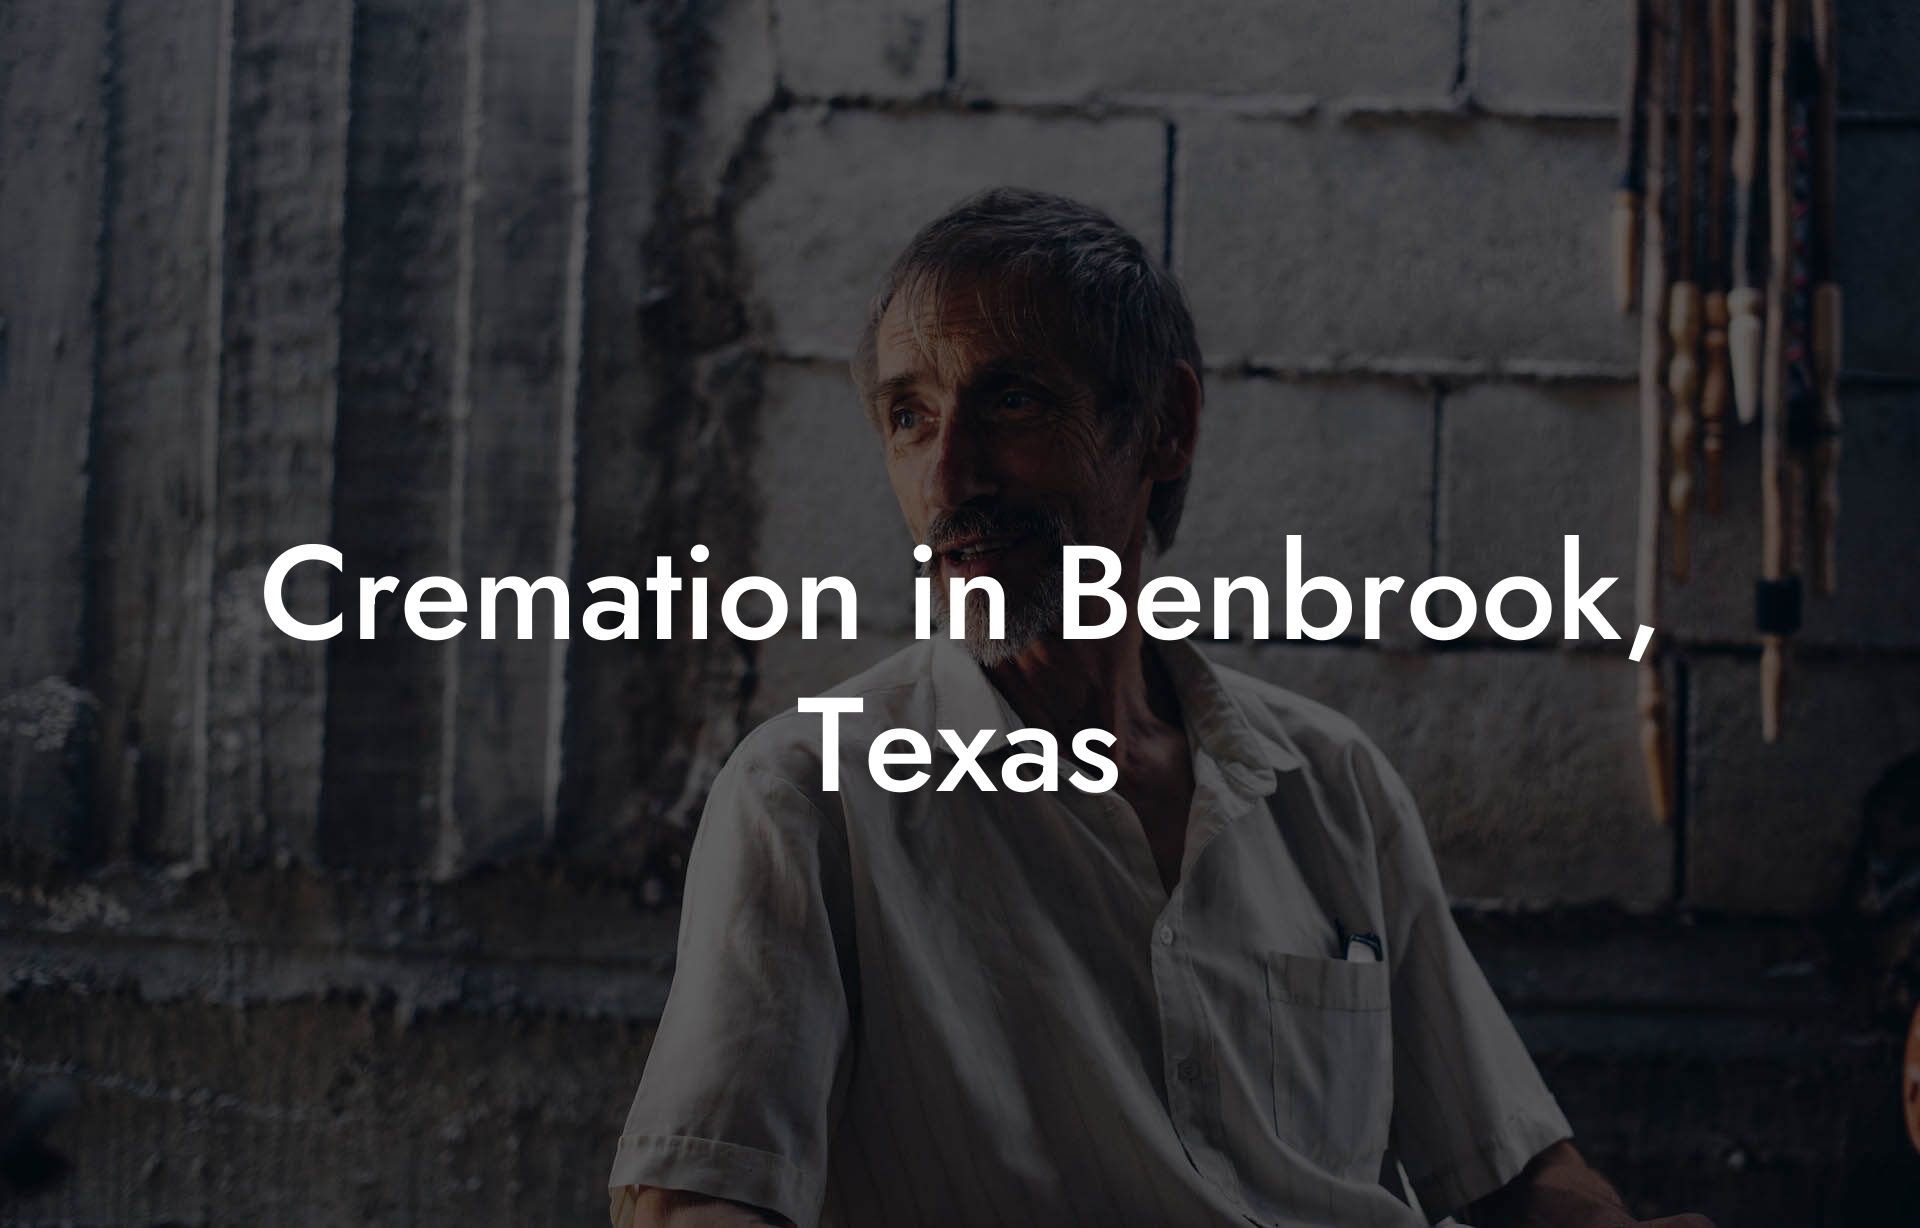 Cremation in Benbrook, Texas